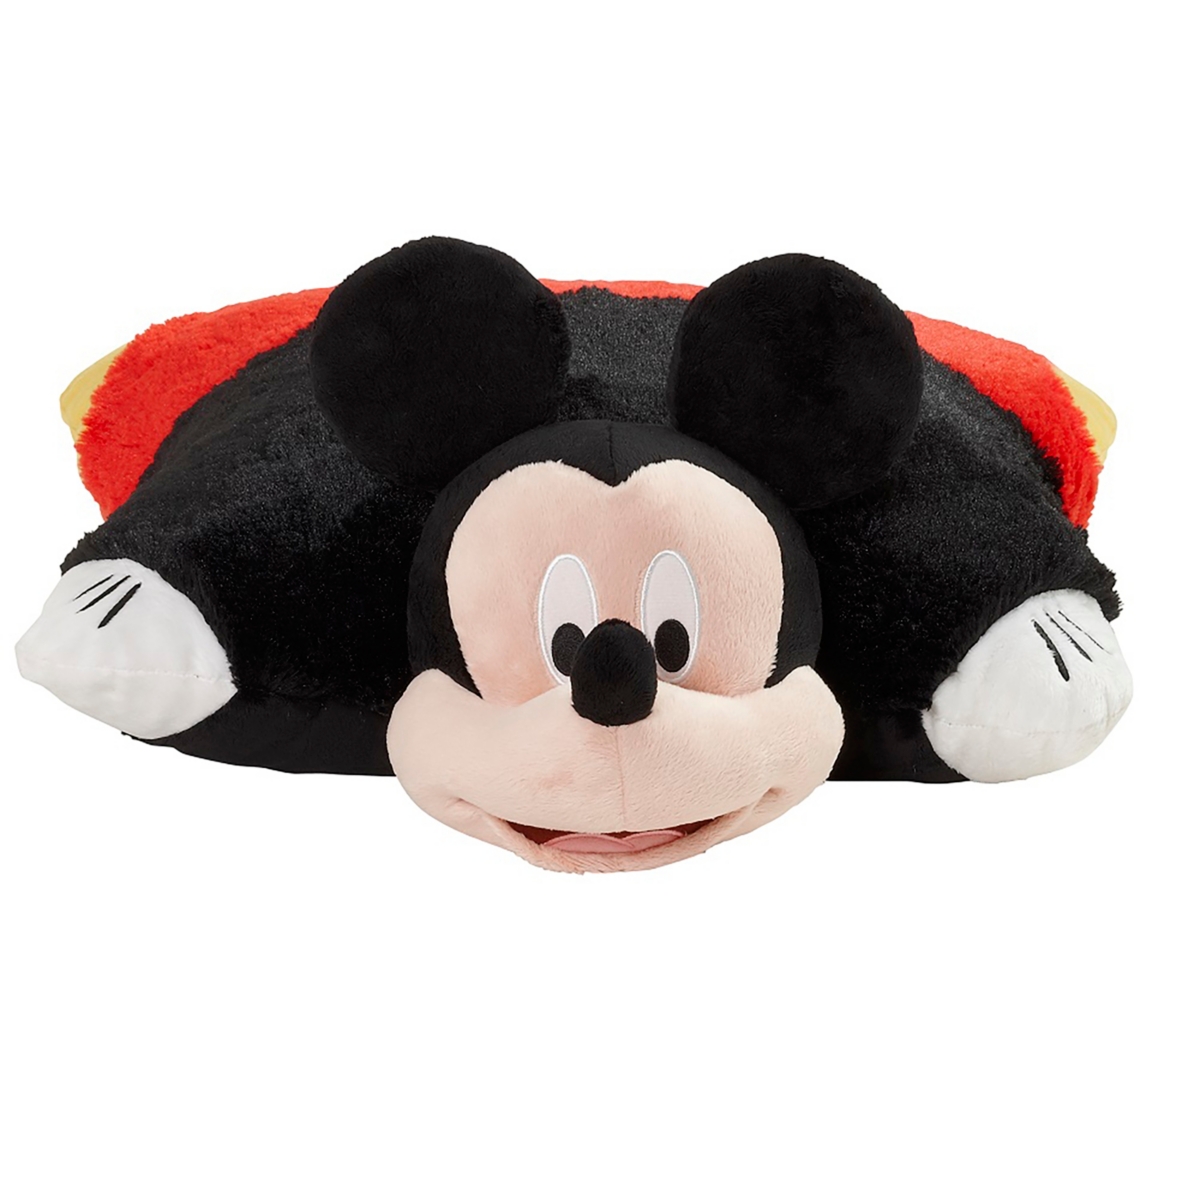 Shop Pillow Pets Disney Mickey Mouse Stuffed Animal Plush Toy In Medium Red